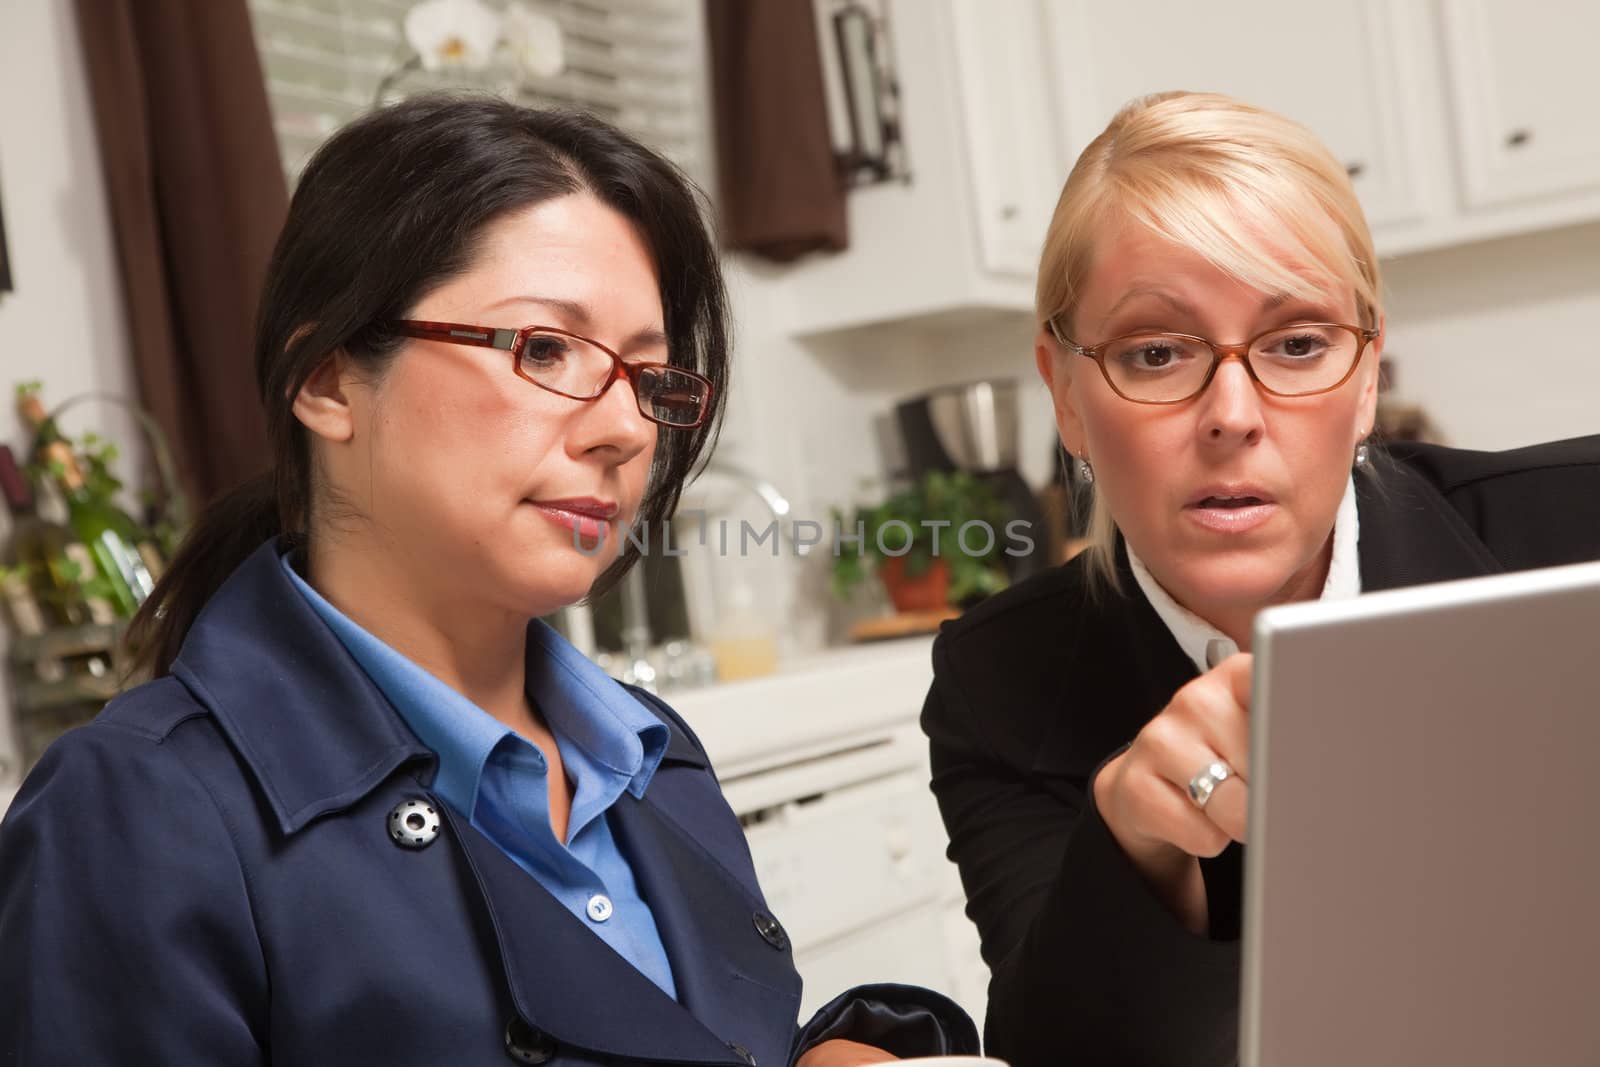 Businesswomen Working on the Laptop Together in the Kitchen.